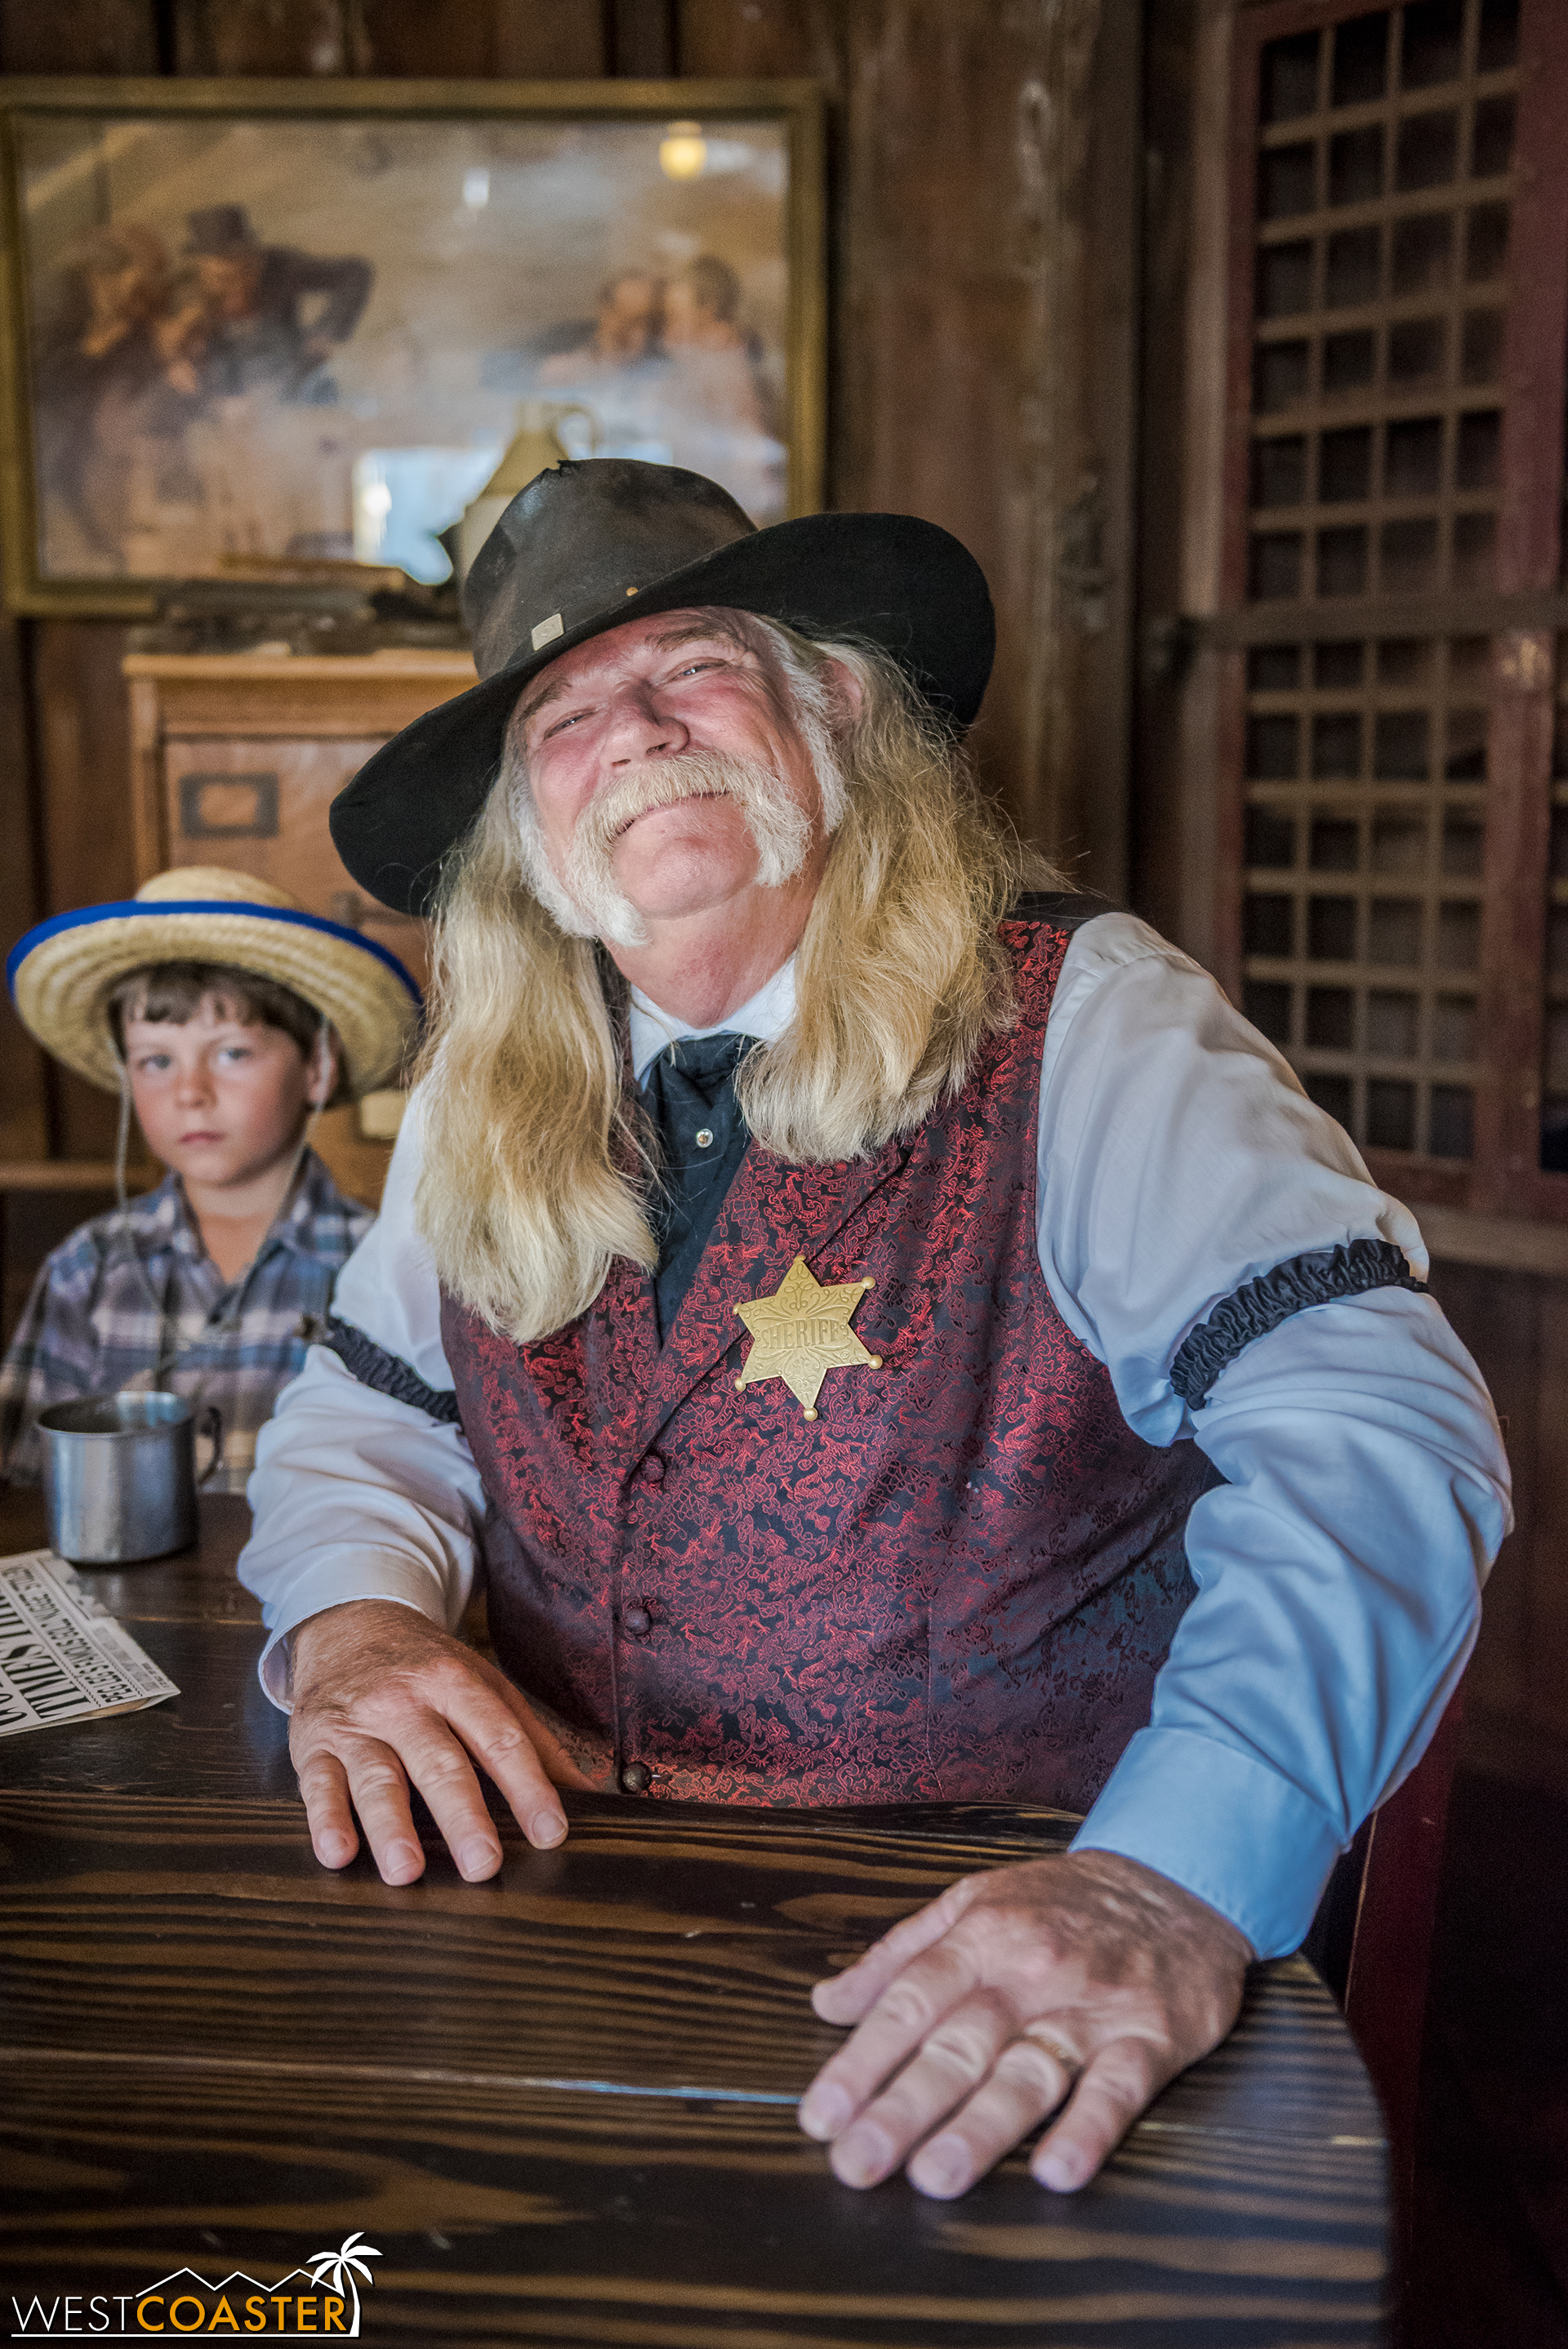  Of course, Sheriff Bryce Wheeler is around as always.  On this day, he’s waiting for a stagecoach to arrive carrying his date to the Founder’s Day Hoedown, Goldie West.  Unfortunately, the stagecoach has been delayed by three days, much to many peop